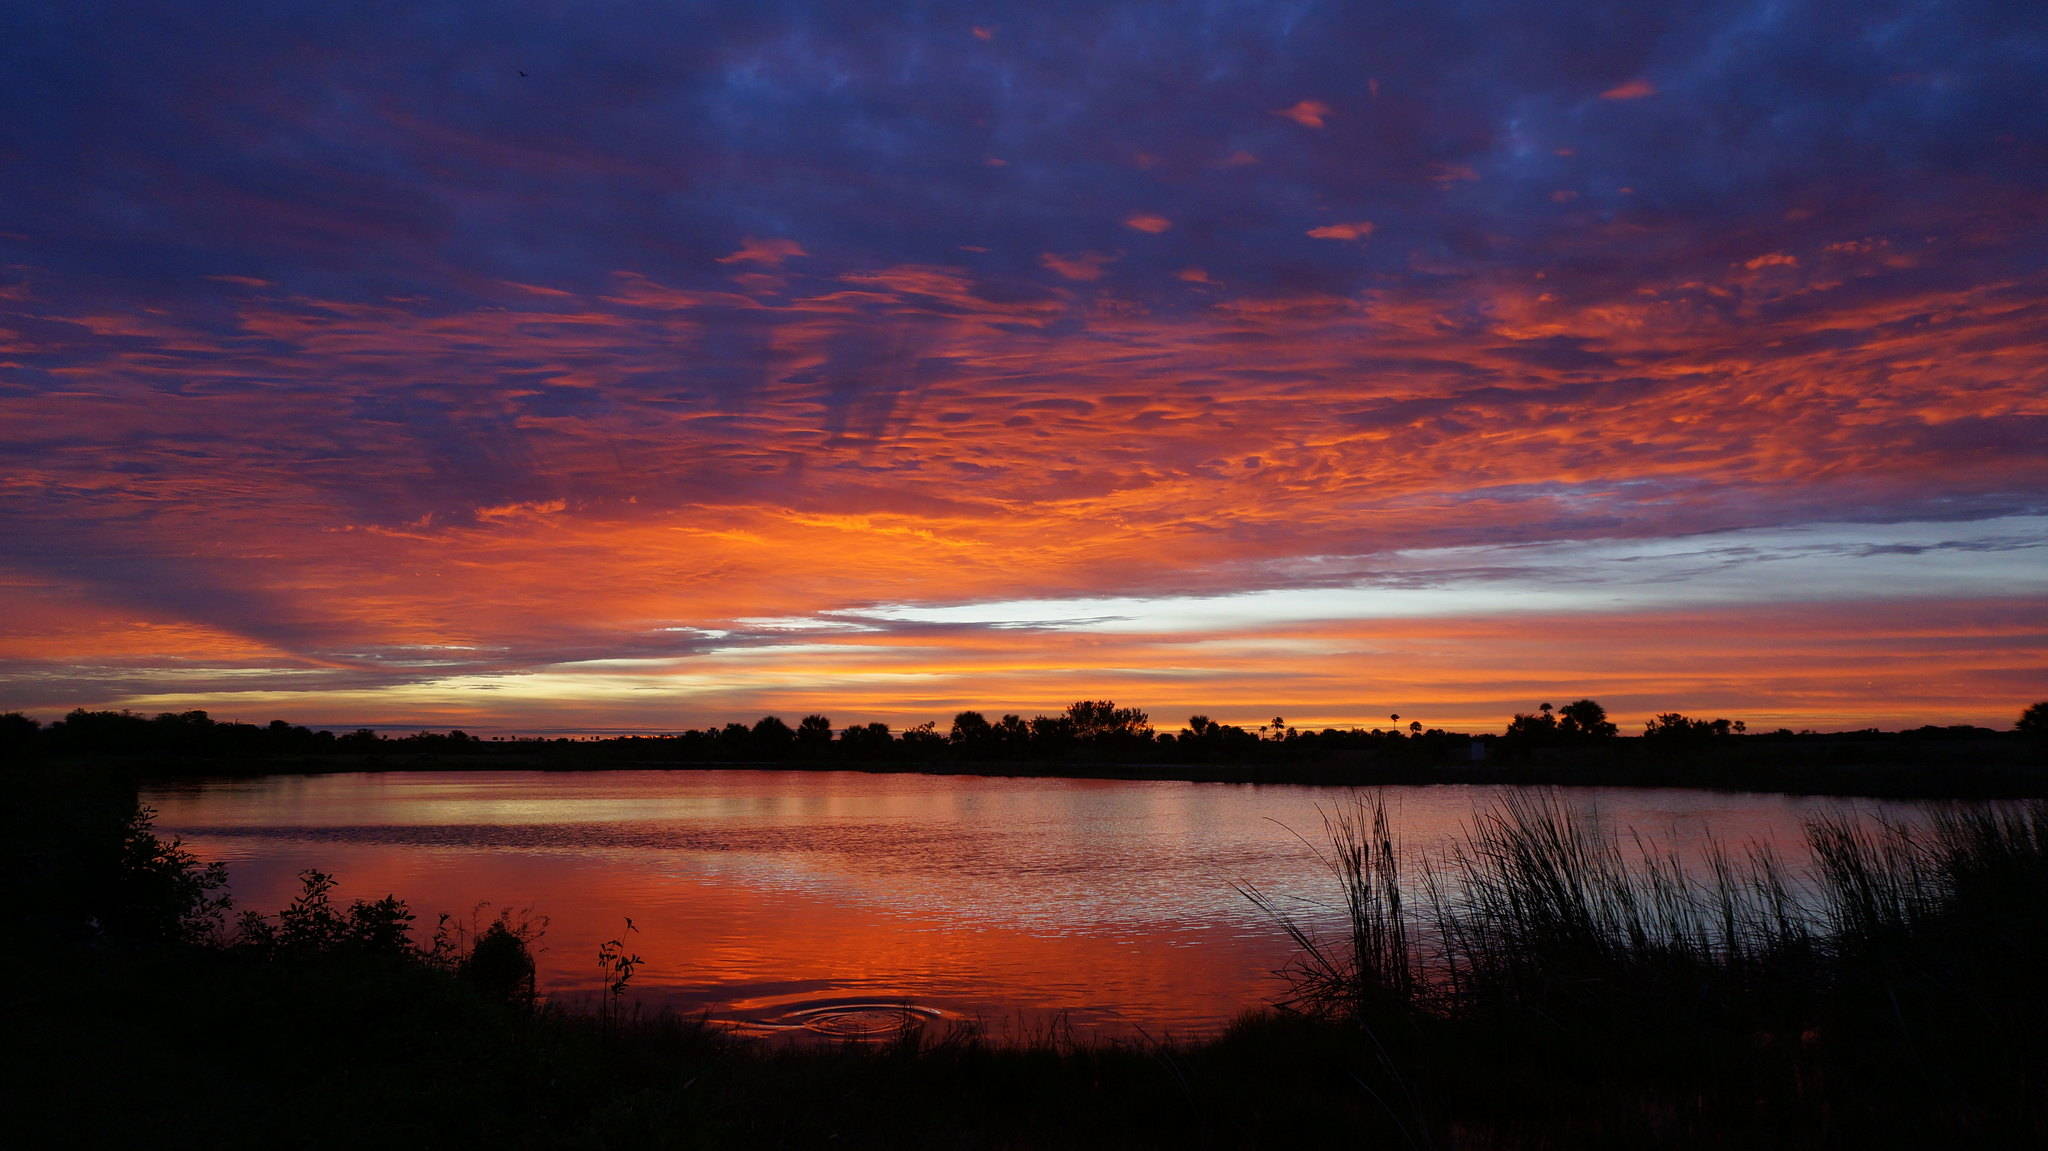 Orange, purple, and blue colors fade into the clouds as the sun sets over a lake.